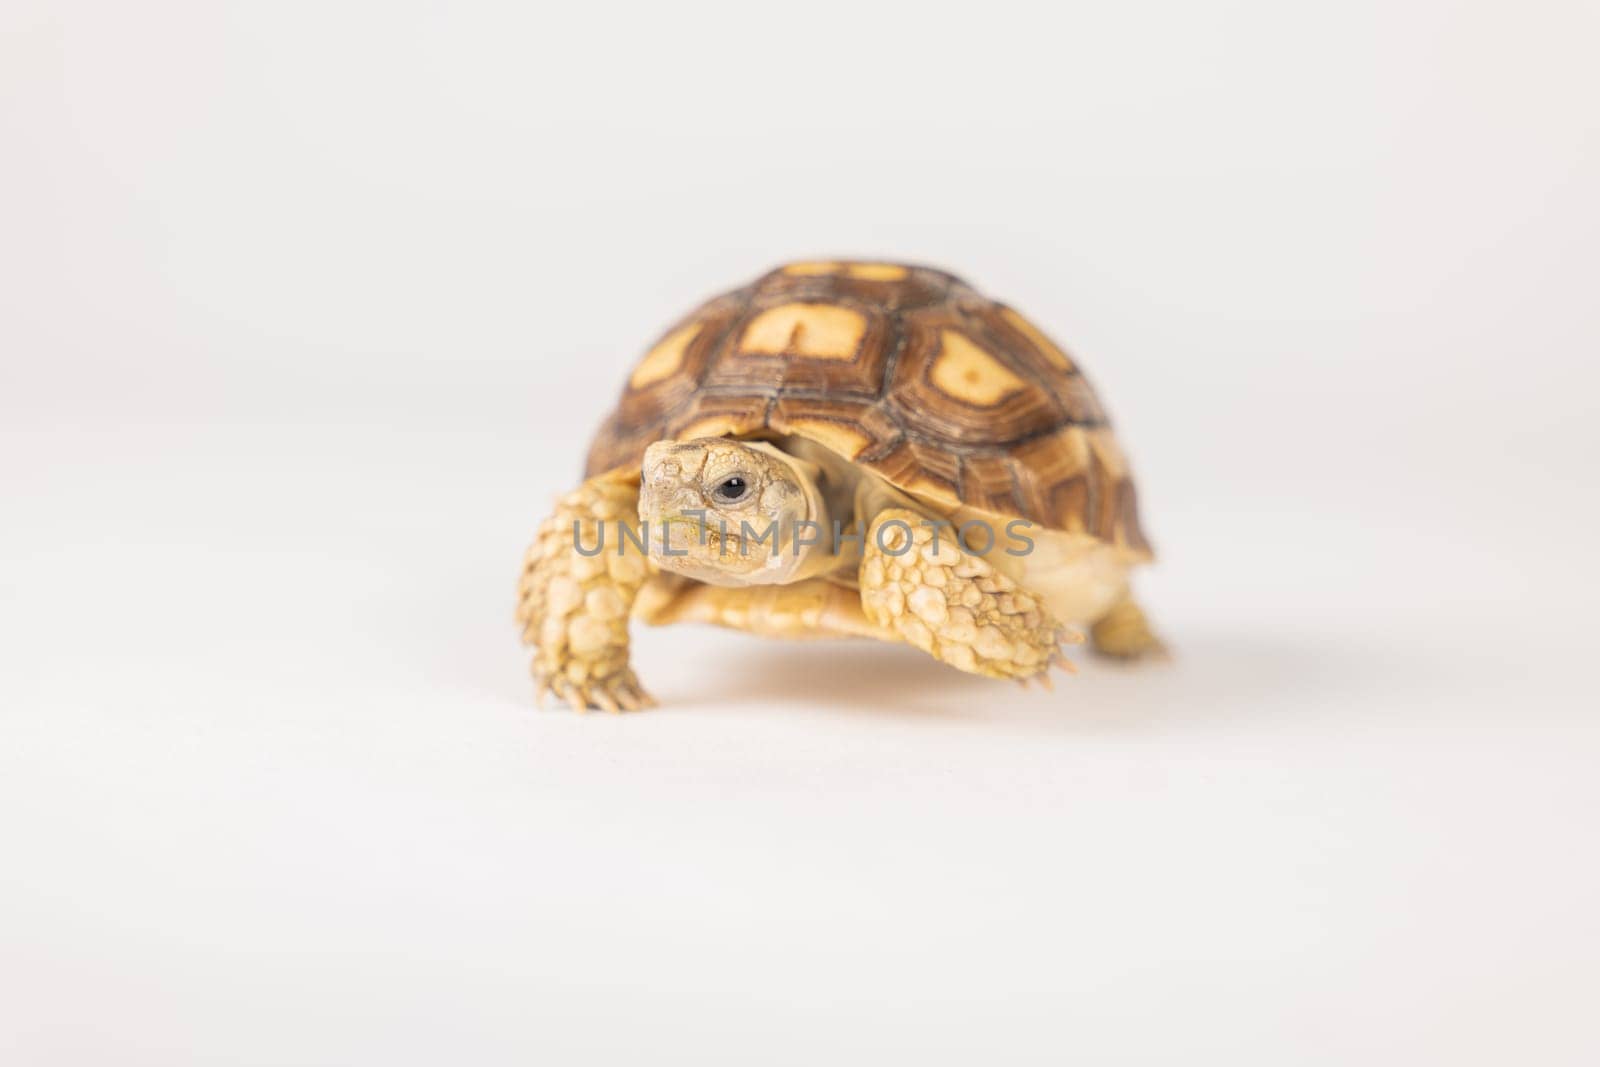 An isolated portrait of the sulcata tortoise, a patient and cute African reptile, highlighting the beauty of its unique design and pattern against a white background. by Sorapop